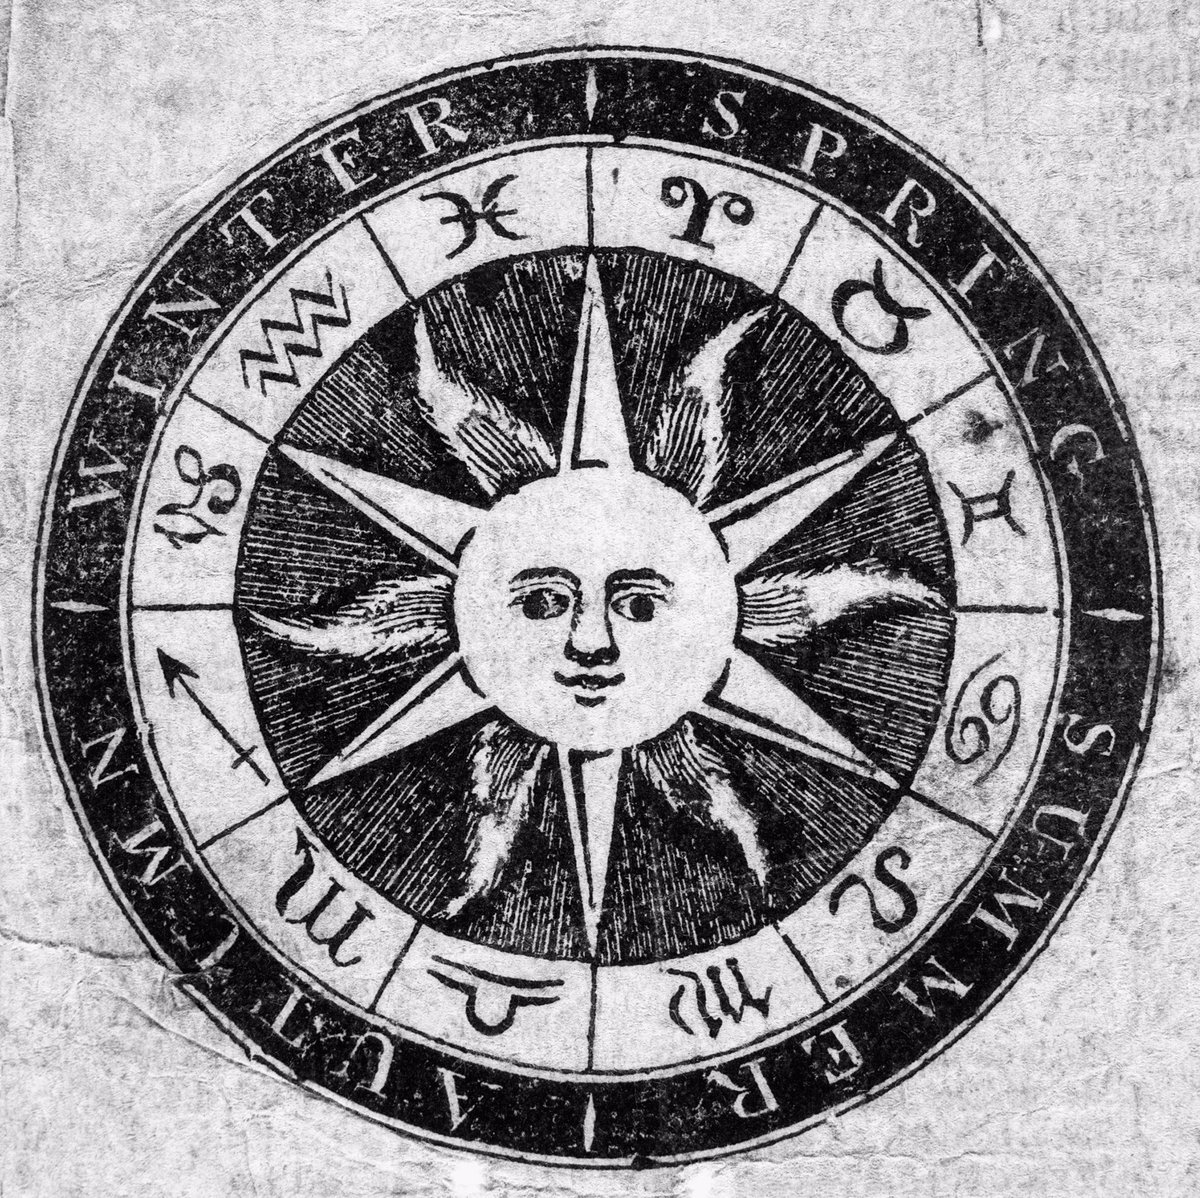 The Winter solstice is the representation of the birth of the sun which I described in the Jesus thread (as well as other Gods) and it’s always December 25th because that’s when the sun begins to rise out of the lowest point in the sky